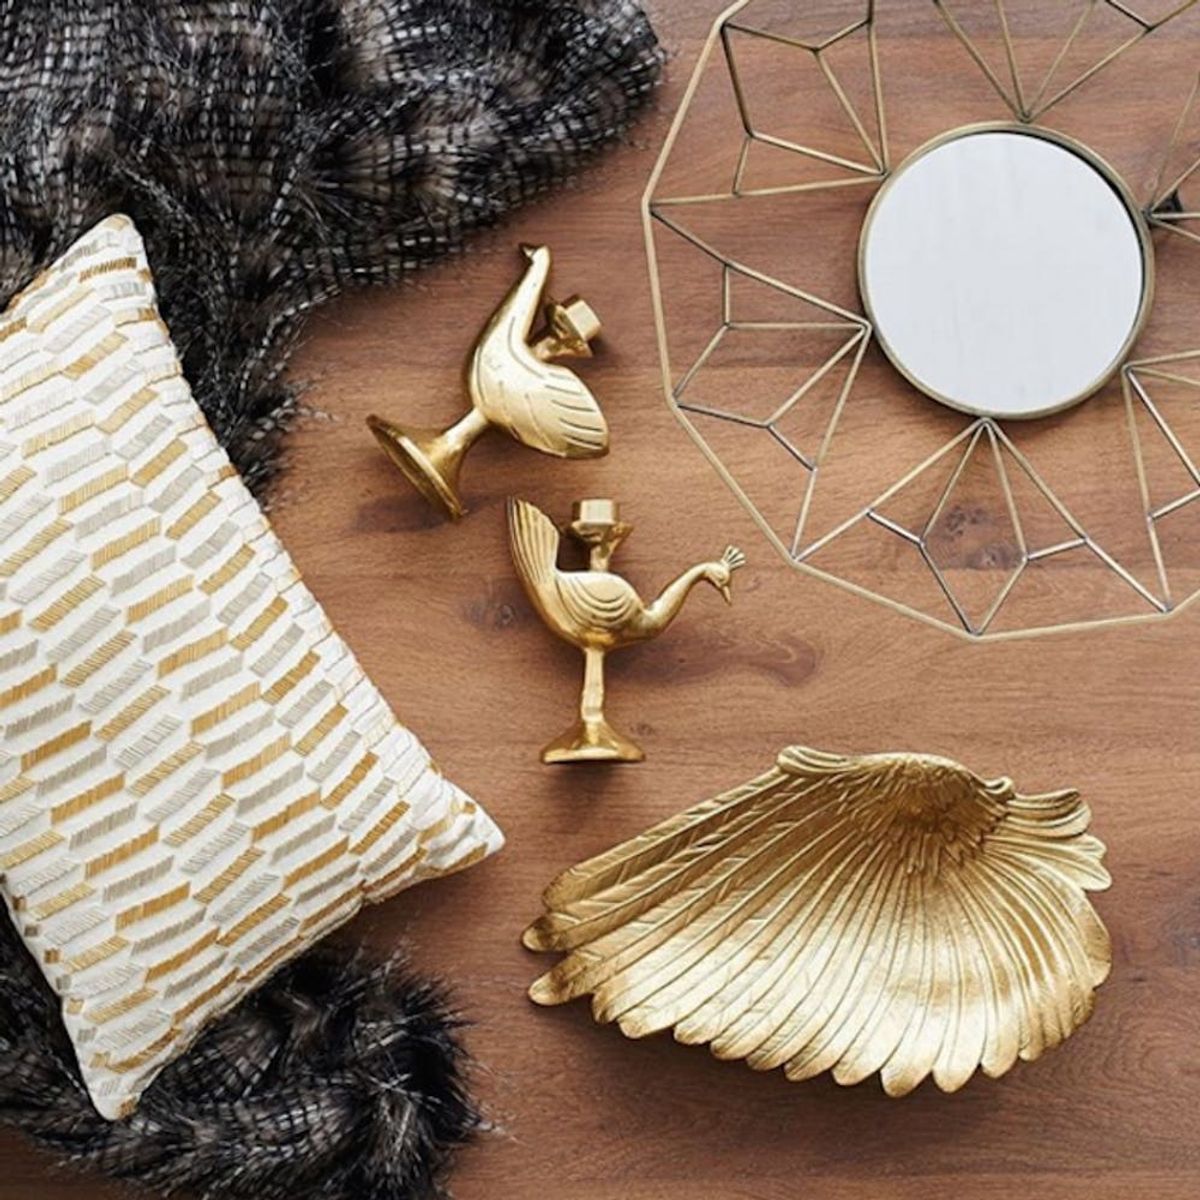 15 of the Best Goodies from Target’s Nate Berkus Holiday Collection